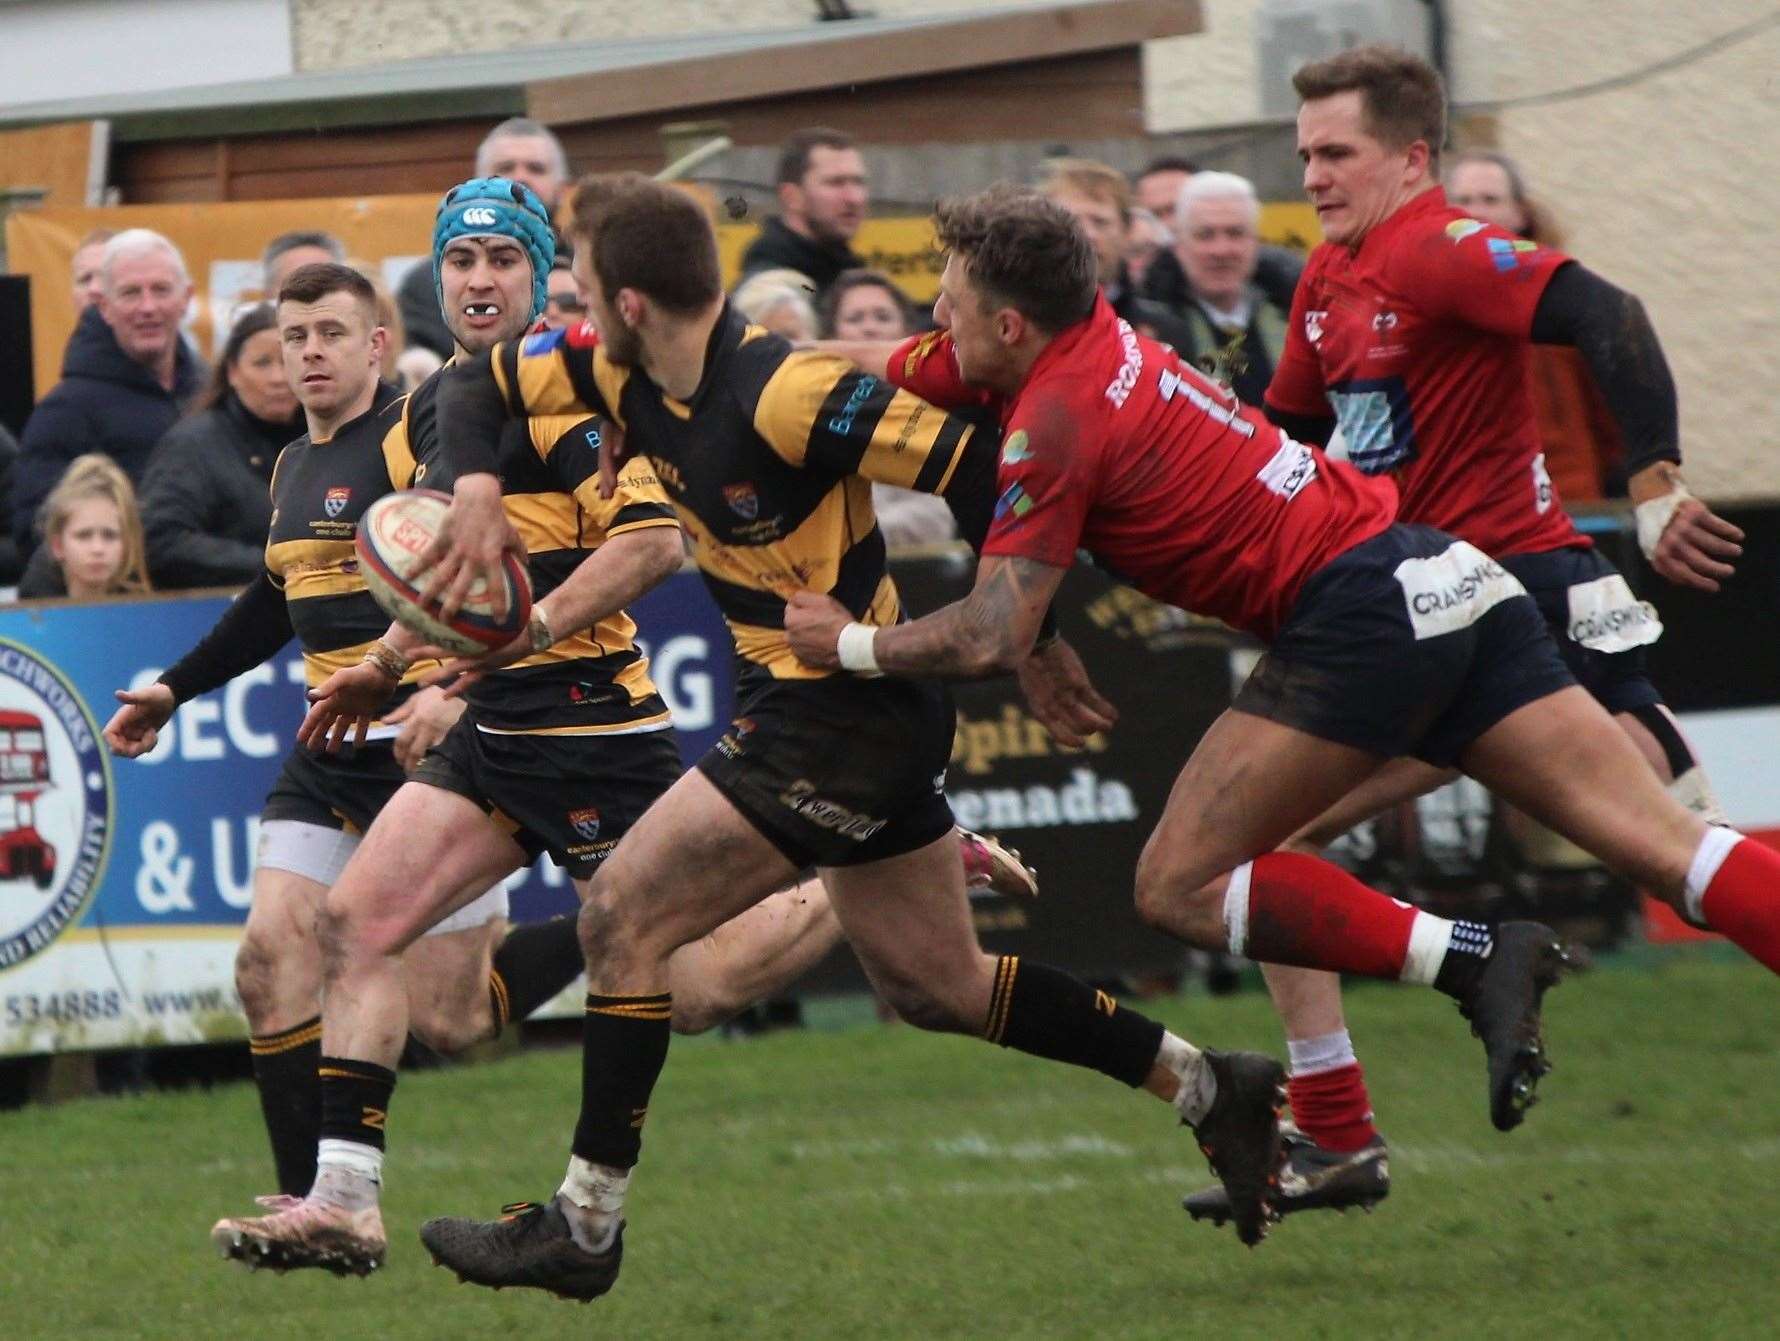 Canterbury in action against Hull Ionians in March before the first national lockdown. Picture: Phillipa Hilton